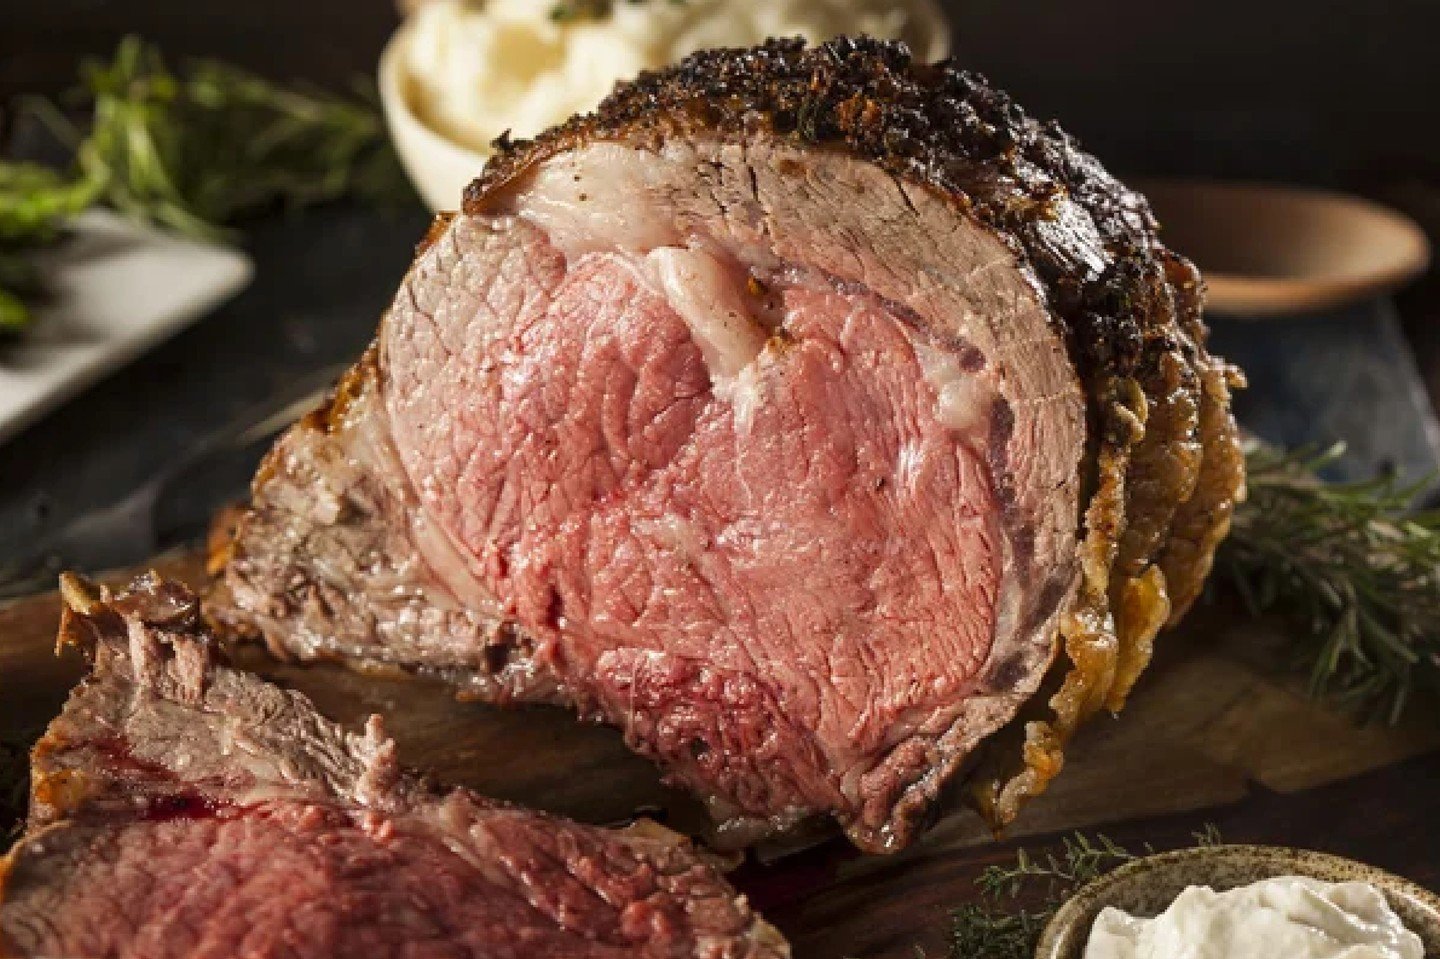 Prime Rib with traditional sides, Live Music and Martinis. 
All after 5:00pm on Mondays at the Beach Chalet. 
🍸🎶

#livemusic #primerib #martinis #oceanview #view #sf #losangeles